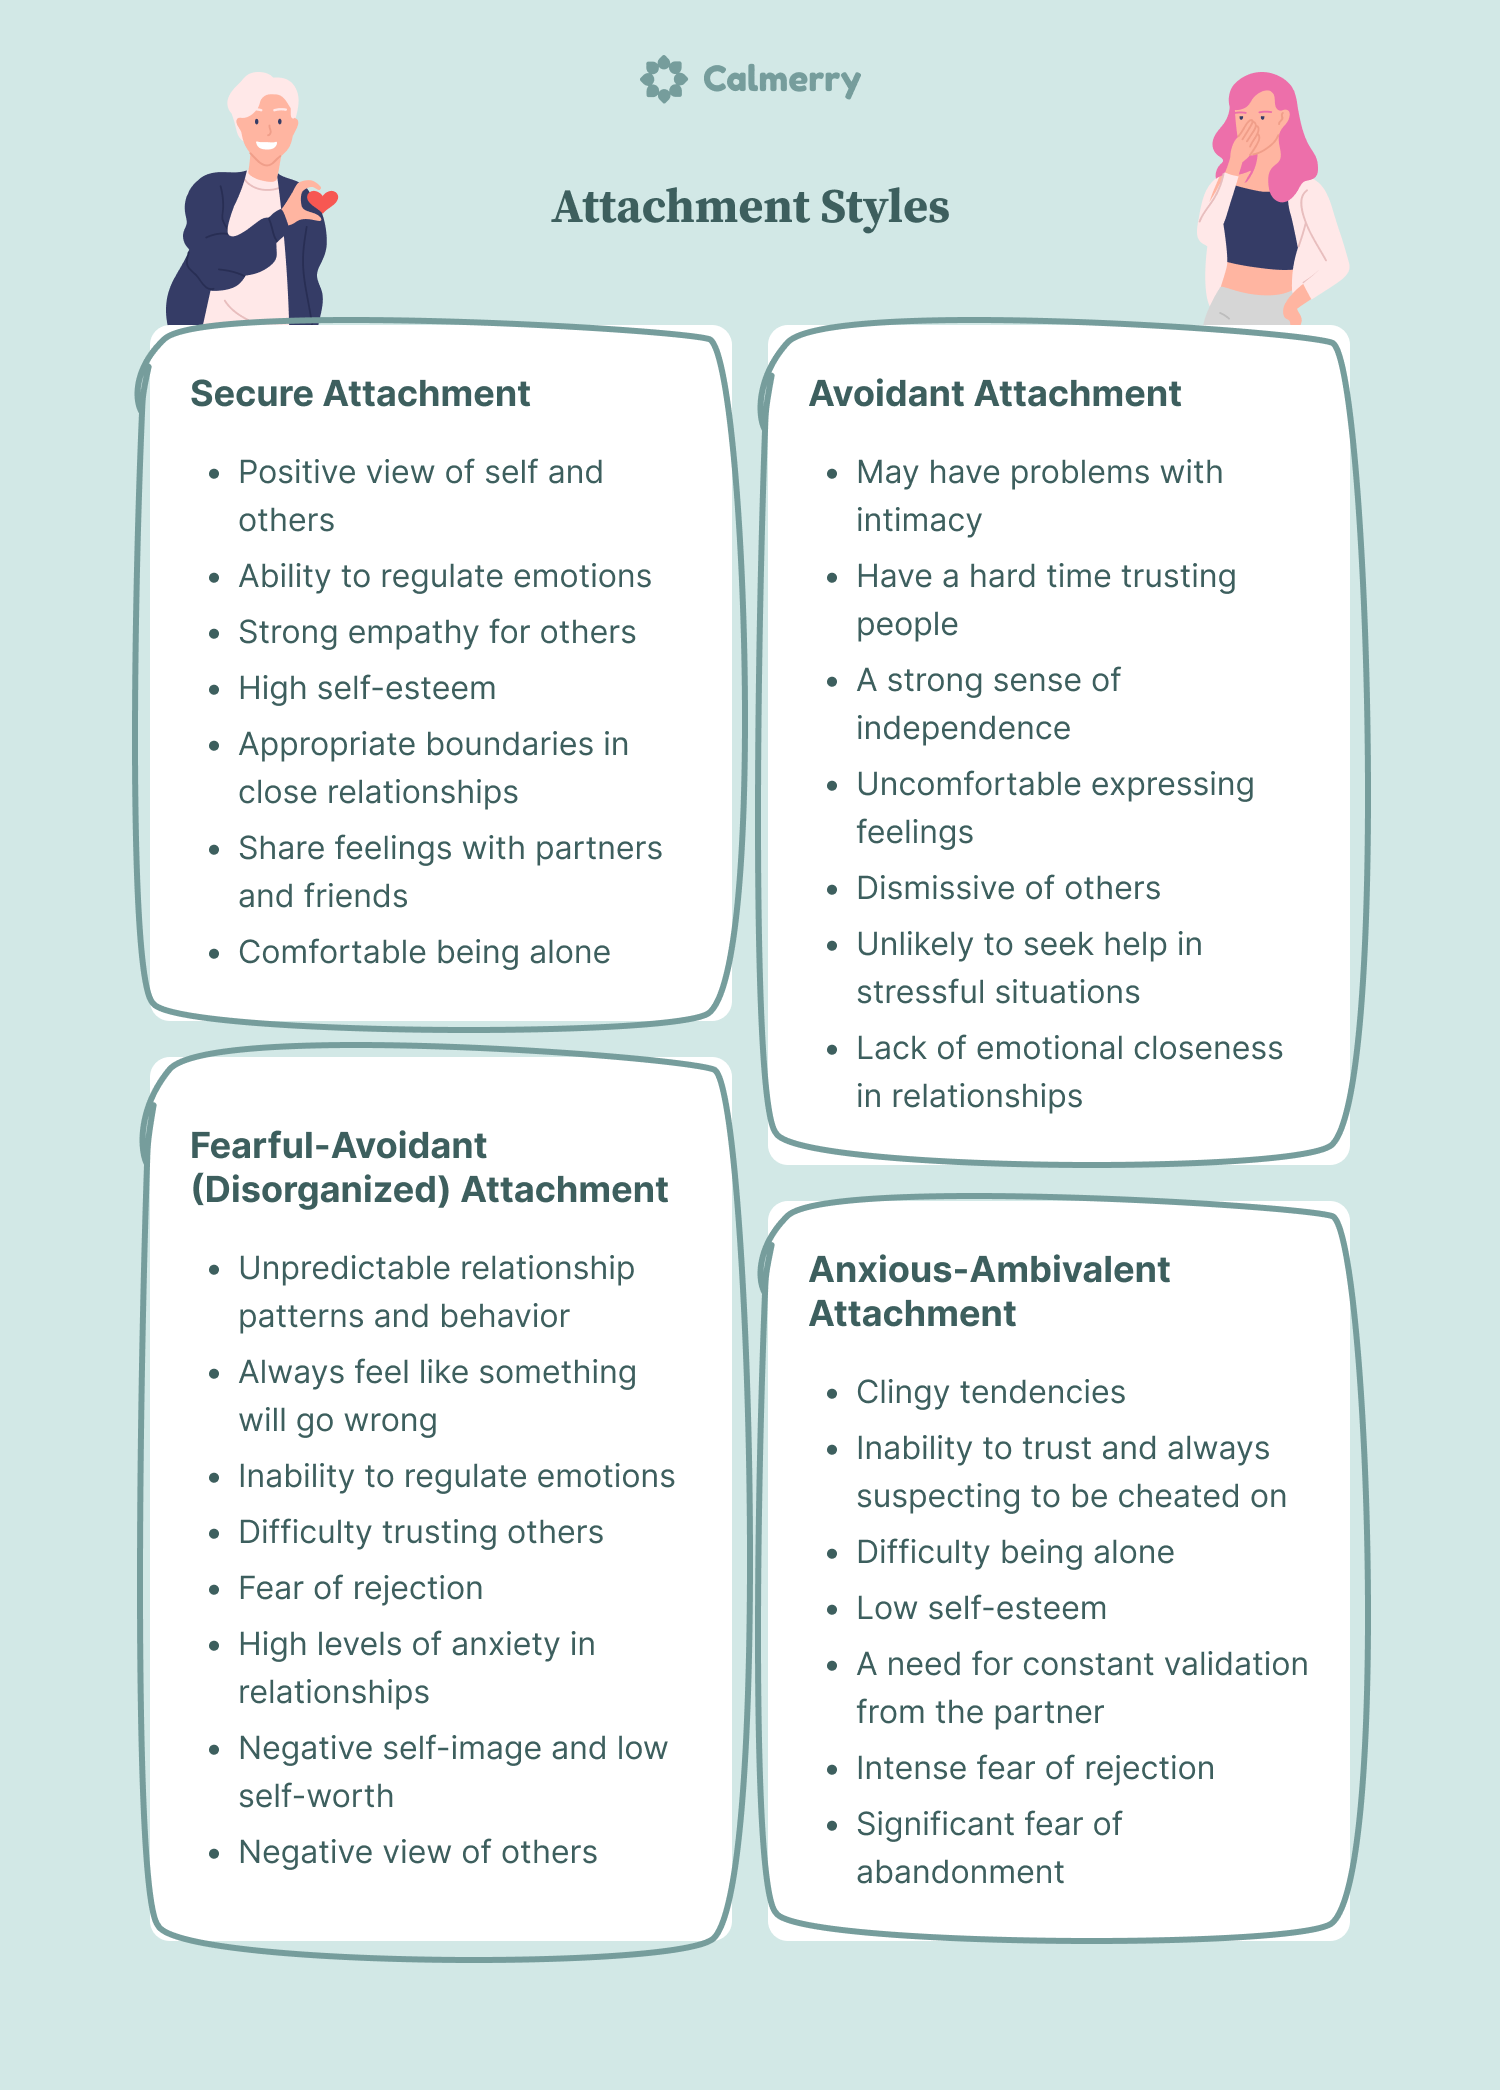 4 Types of Attachment Styles